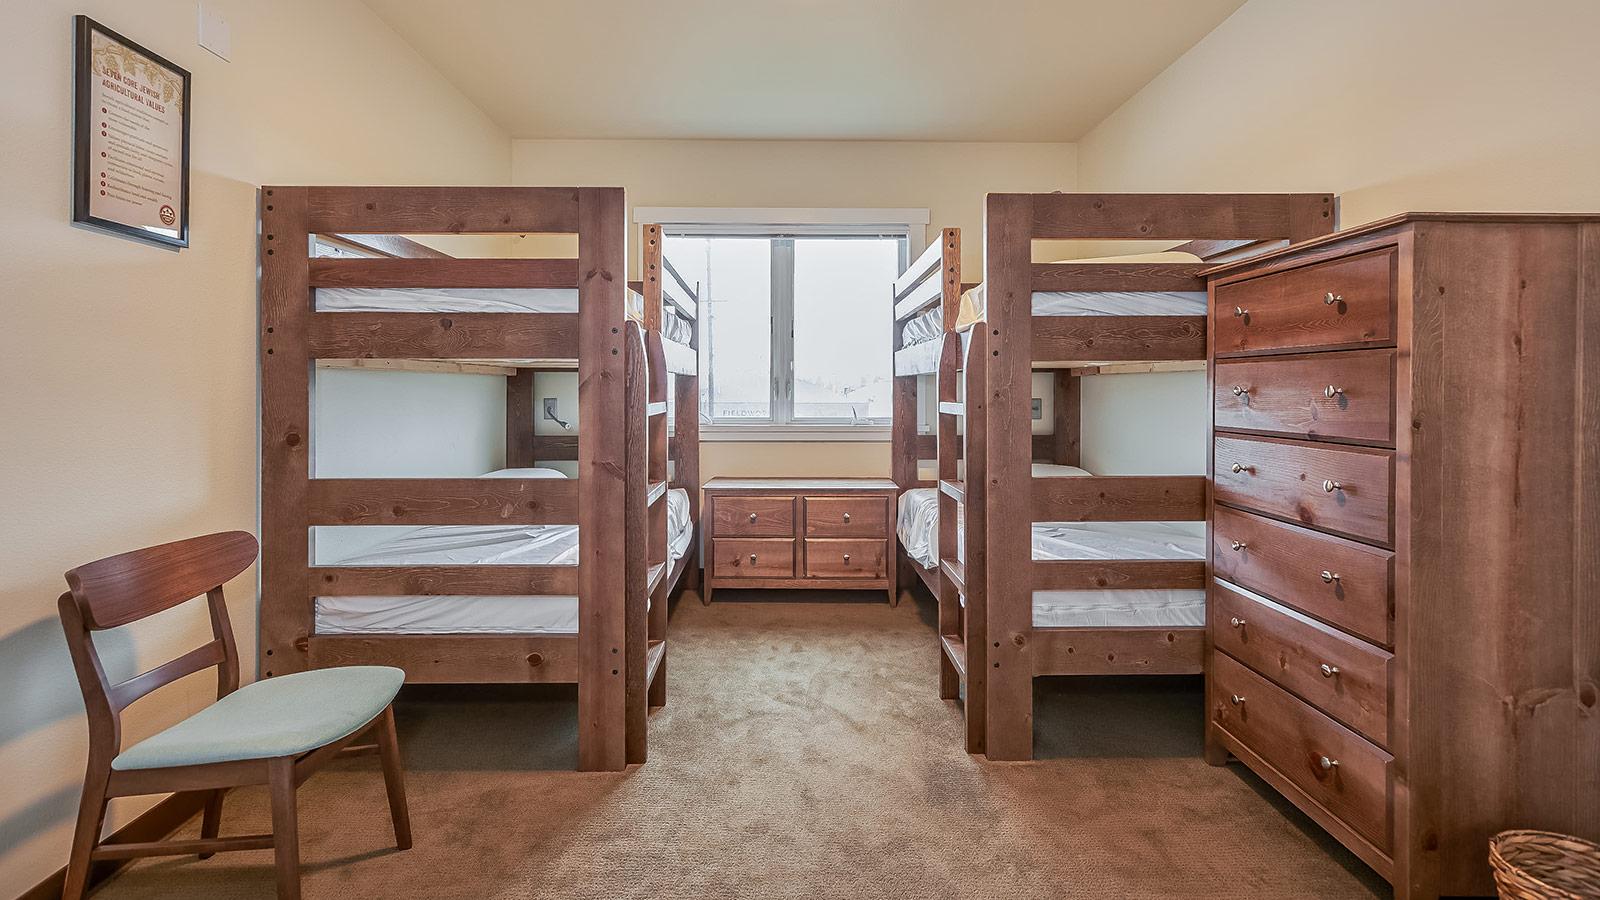 Off-campus apartment rentals for students in NYC